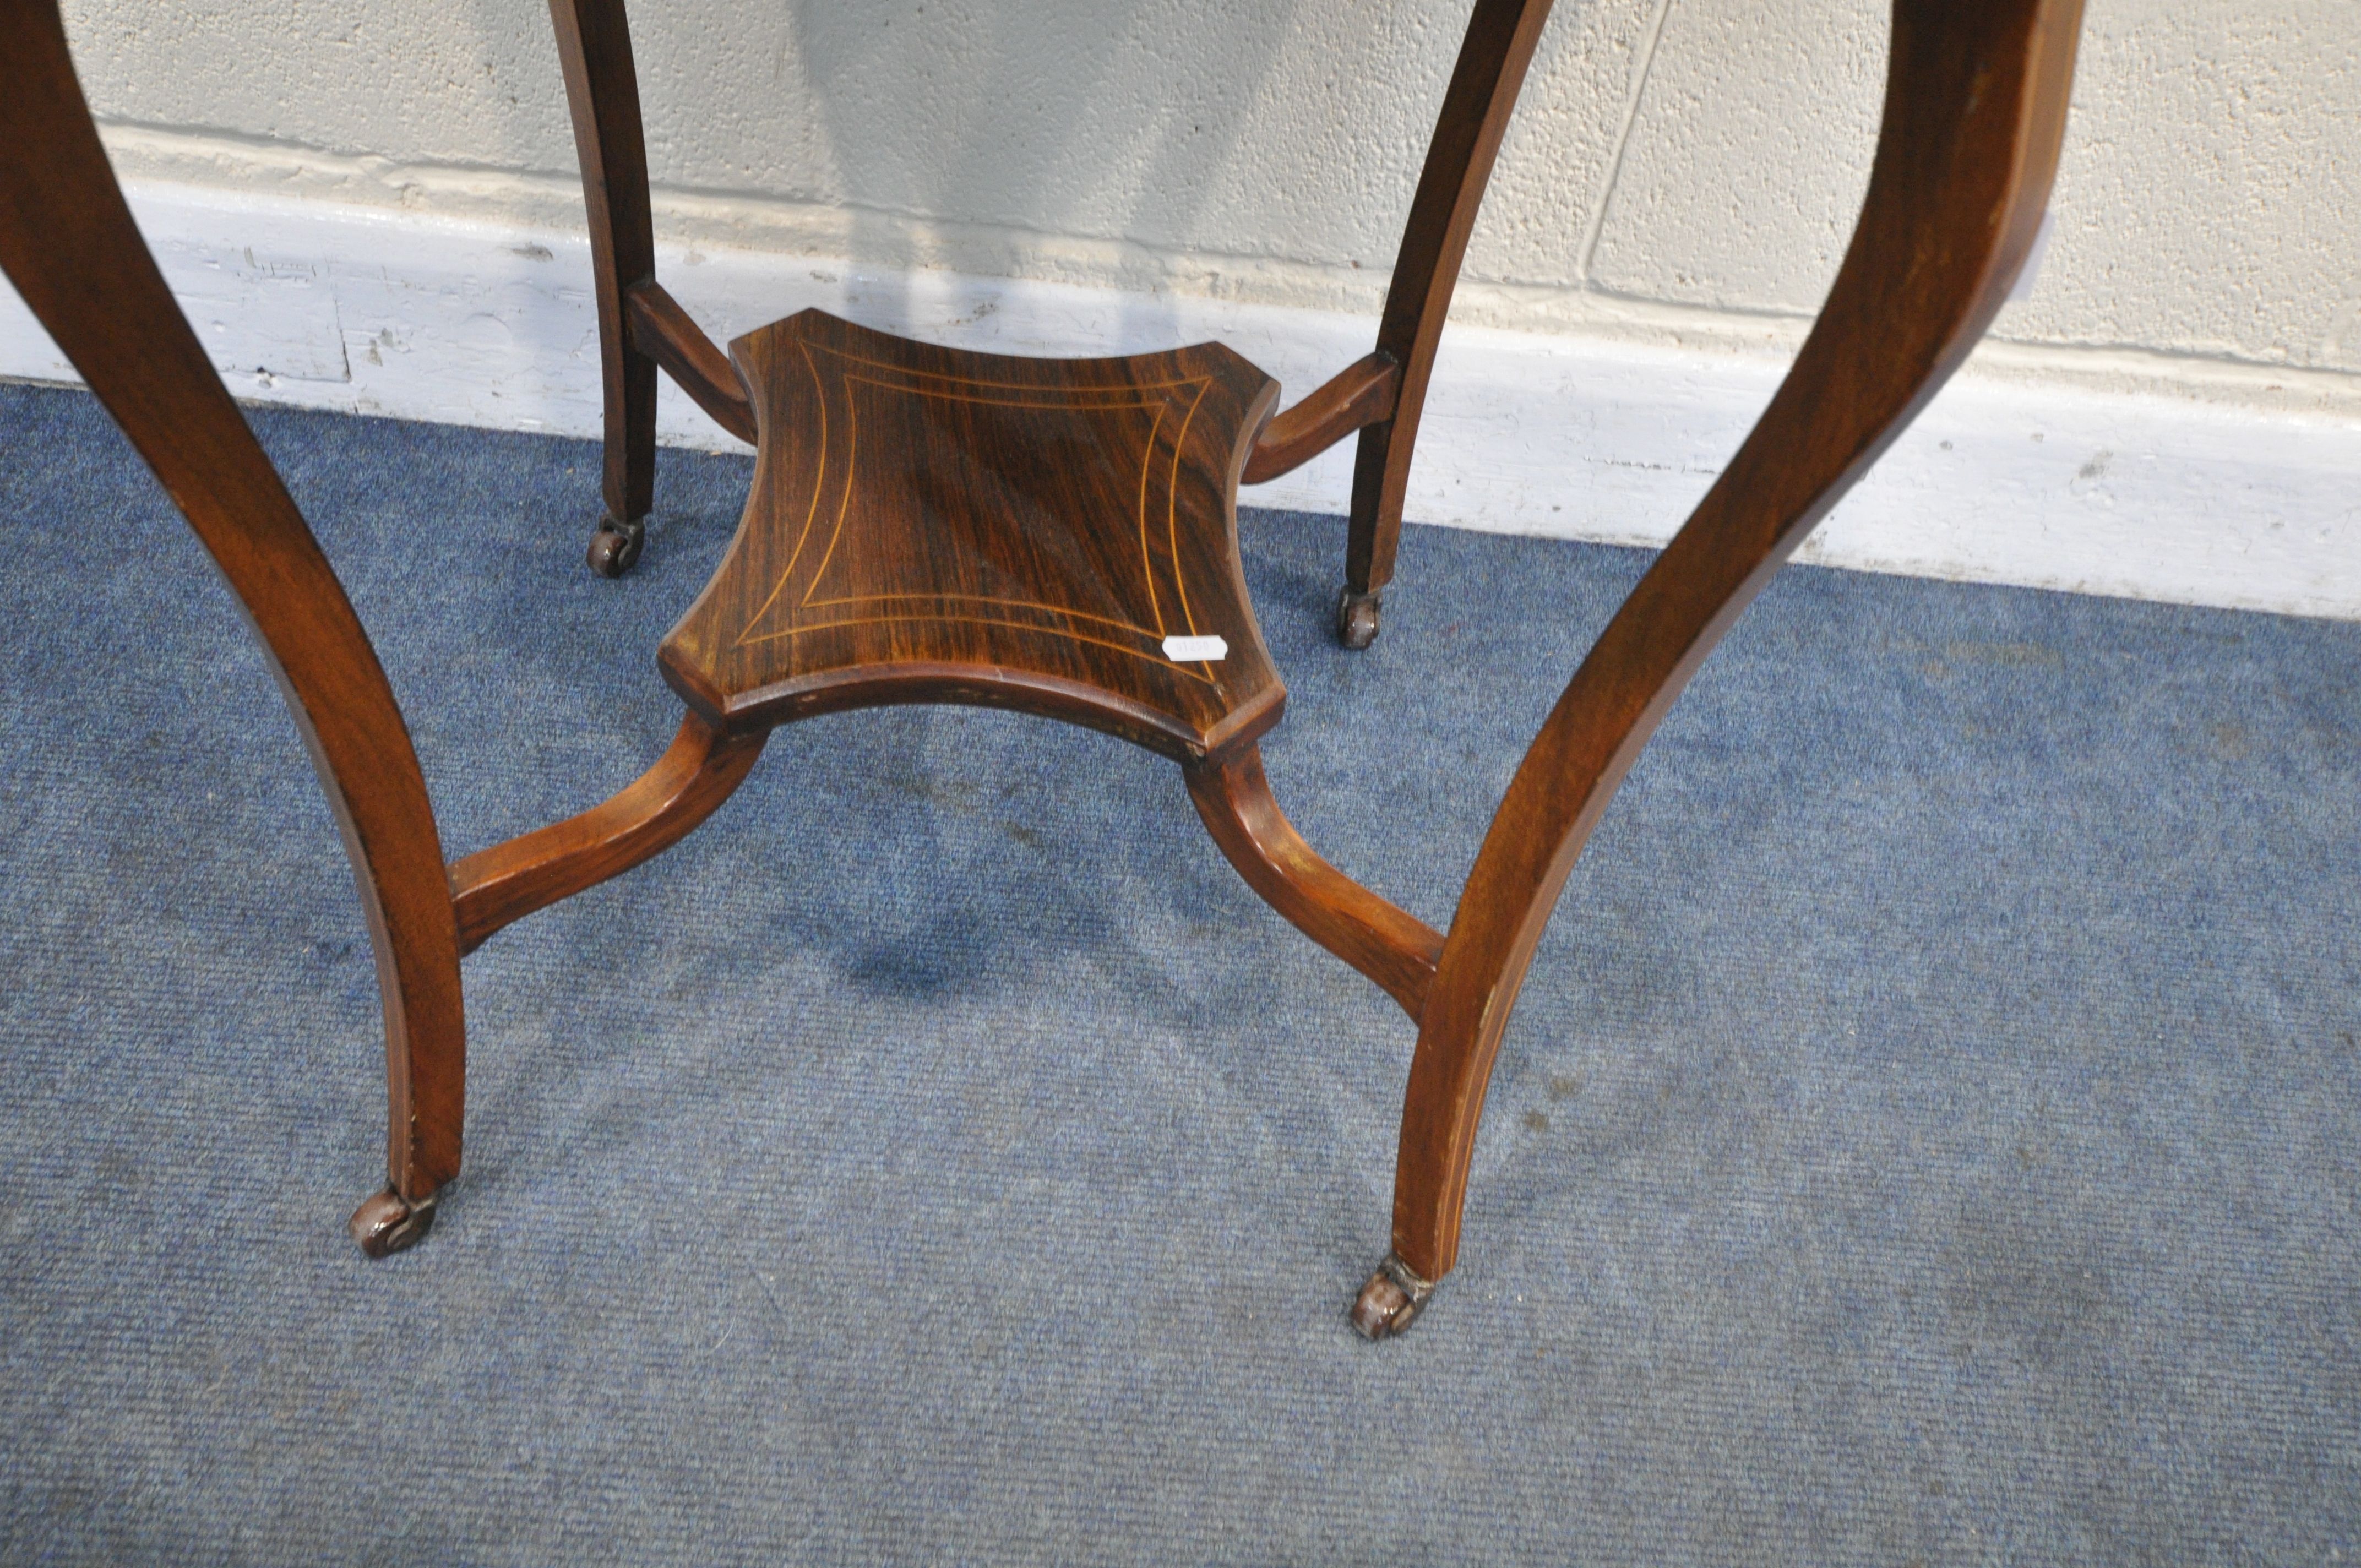 AN EDWARDIAN ROSEWOOD OCTAGONAL CENTRE TABLE, with a wavy edge top, shaped legs and stretchers, - Image 4 of 4